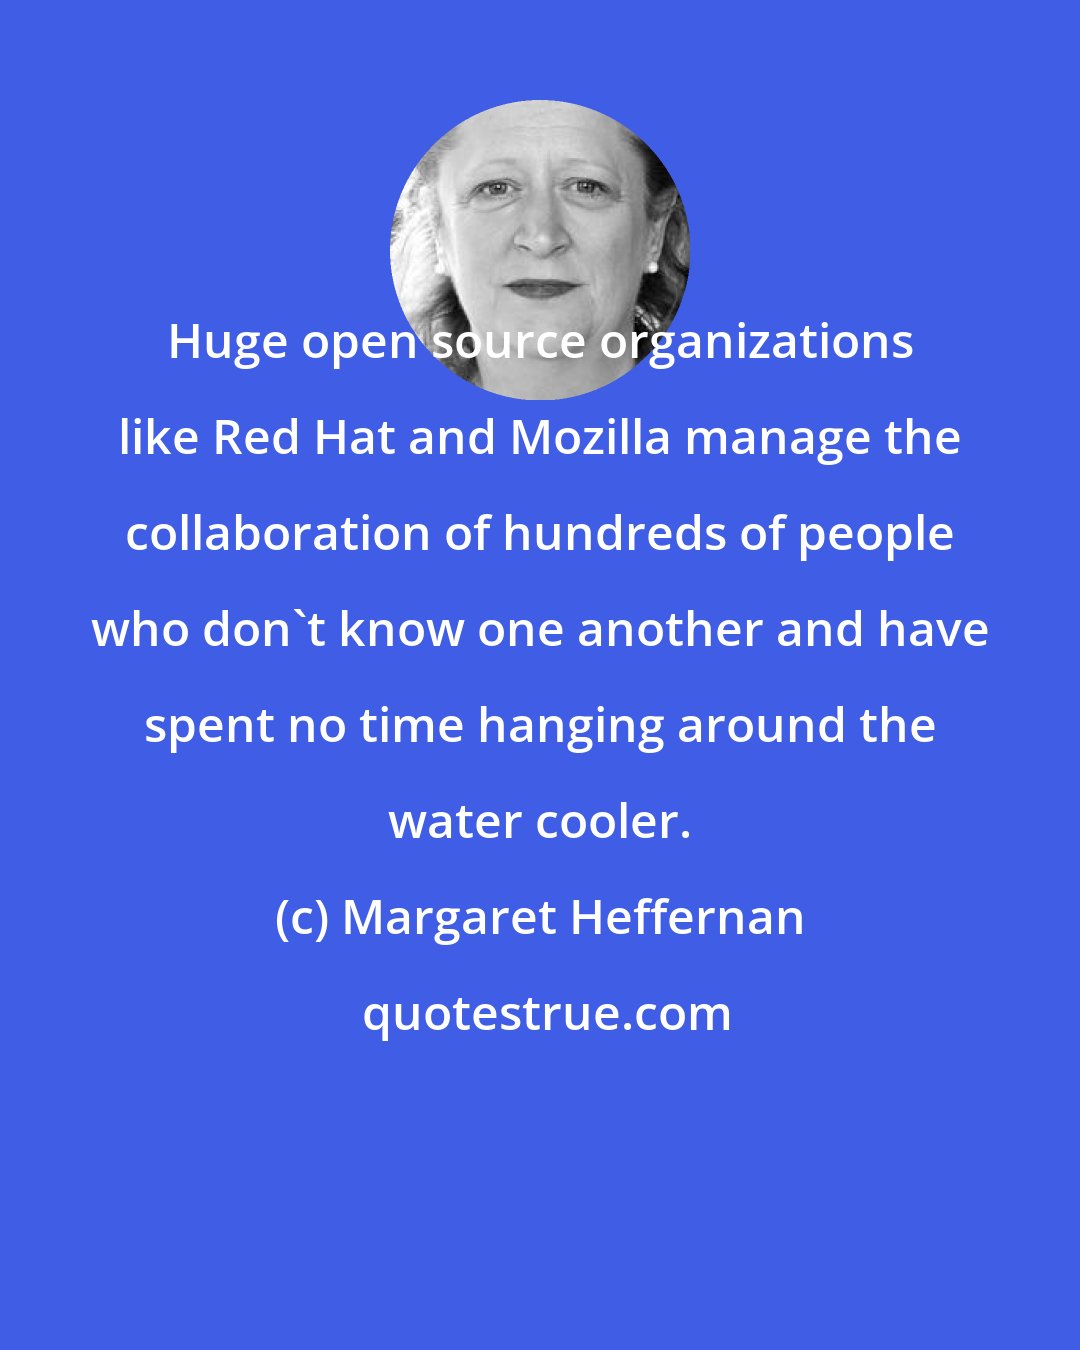 Margaret Heffernan: Huge open source organizations like Red Hat and Mozilla manage the collaboration of hundreds of people who don't know one another and have spent no time hanging around the water cooler.